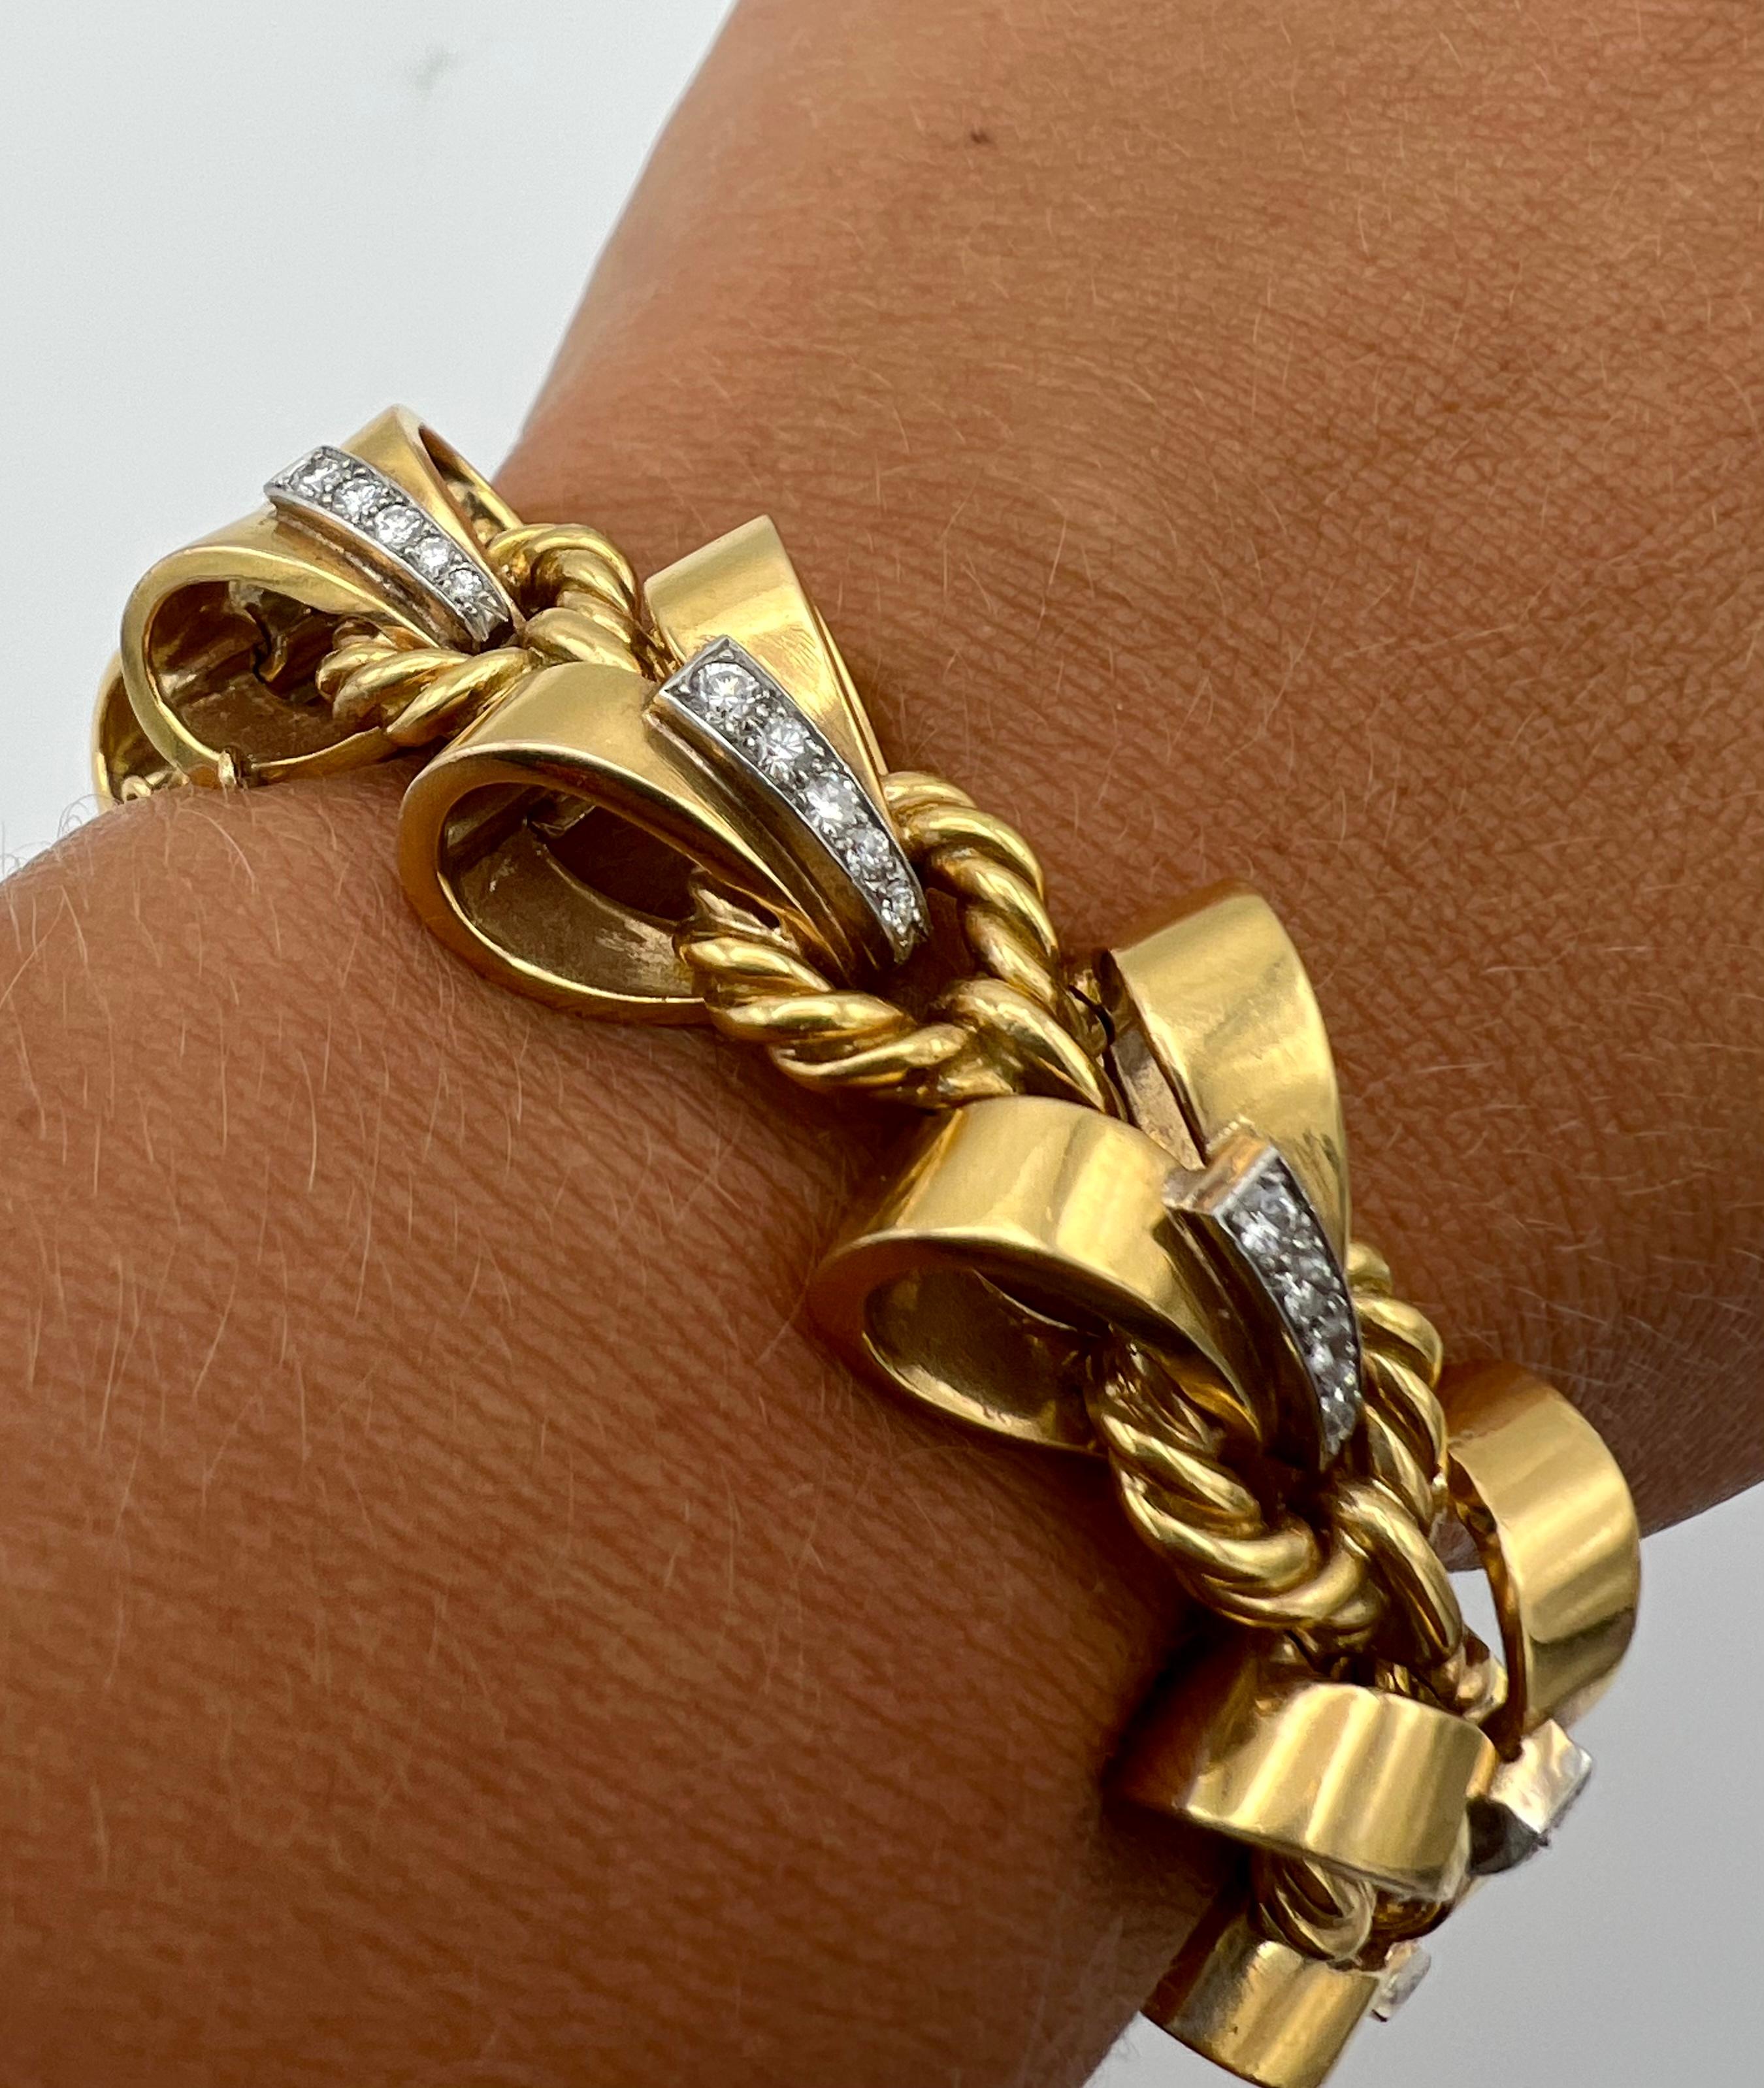 French Mellerio dis Meller Yellow Gold and Dimond Link Bracelet, Circa 1950’s For Sale 3